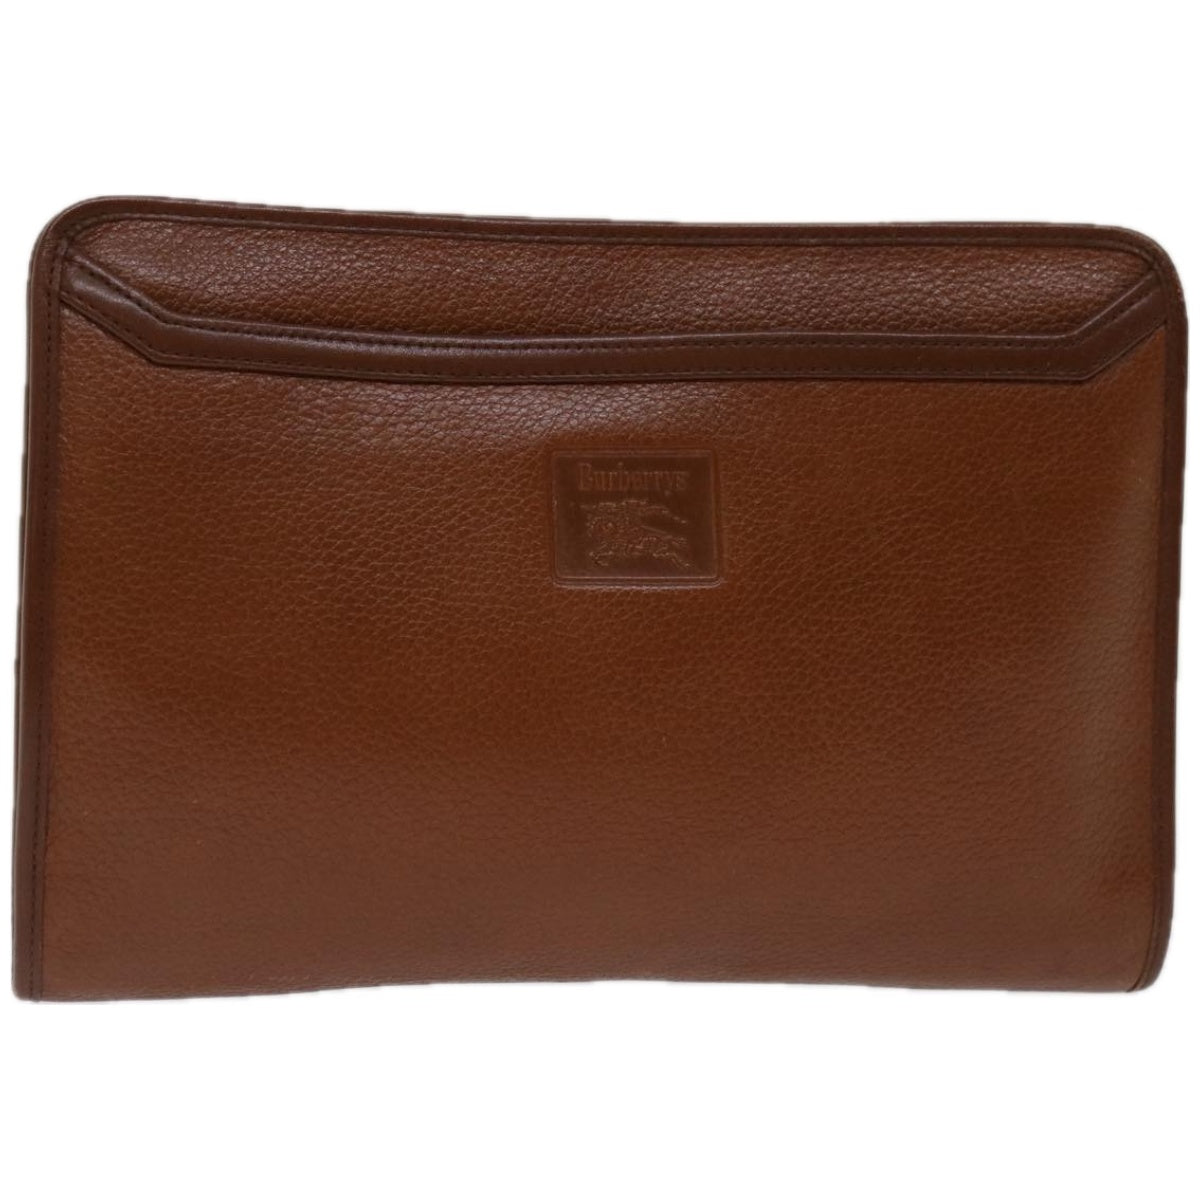 Burberrys Clutch Bag Leather Brown Auth bs12490